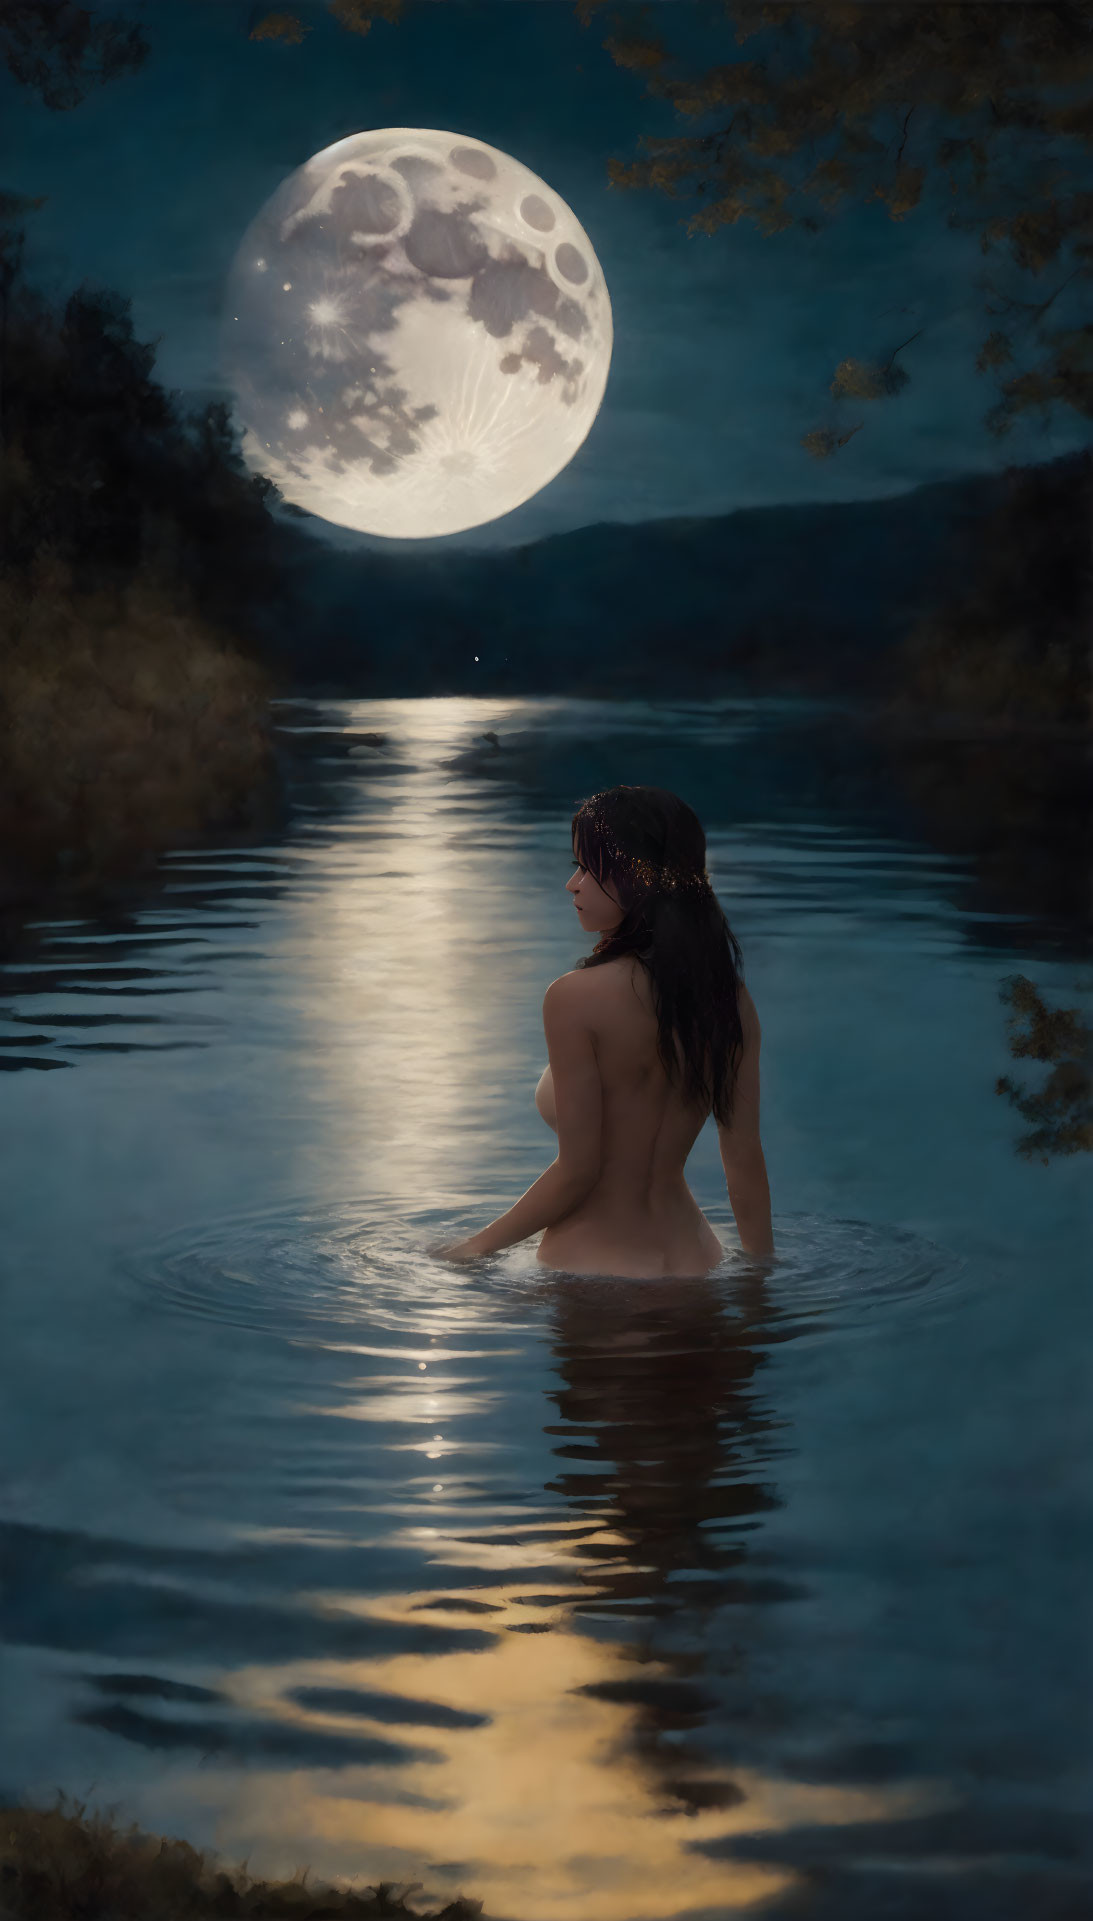 Woman in a lake in the moonlight